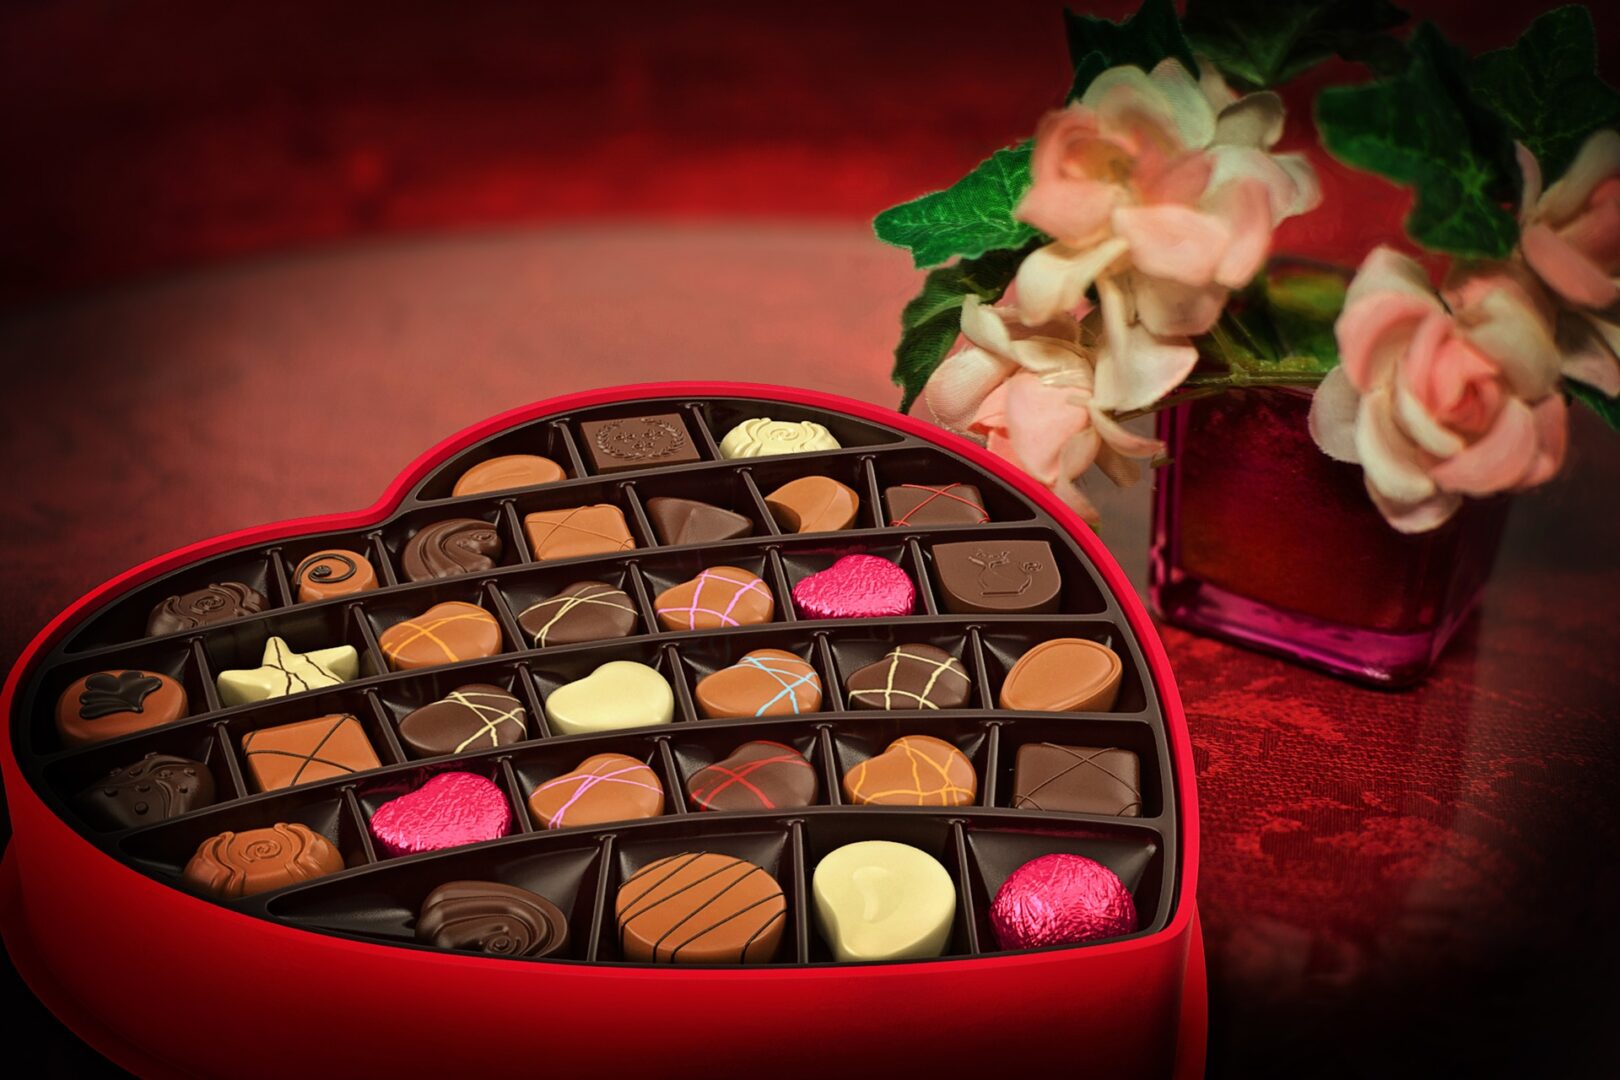 A box of chocolates for Valentine's Day